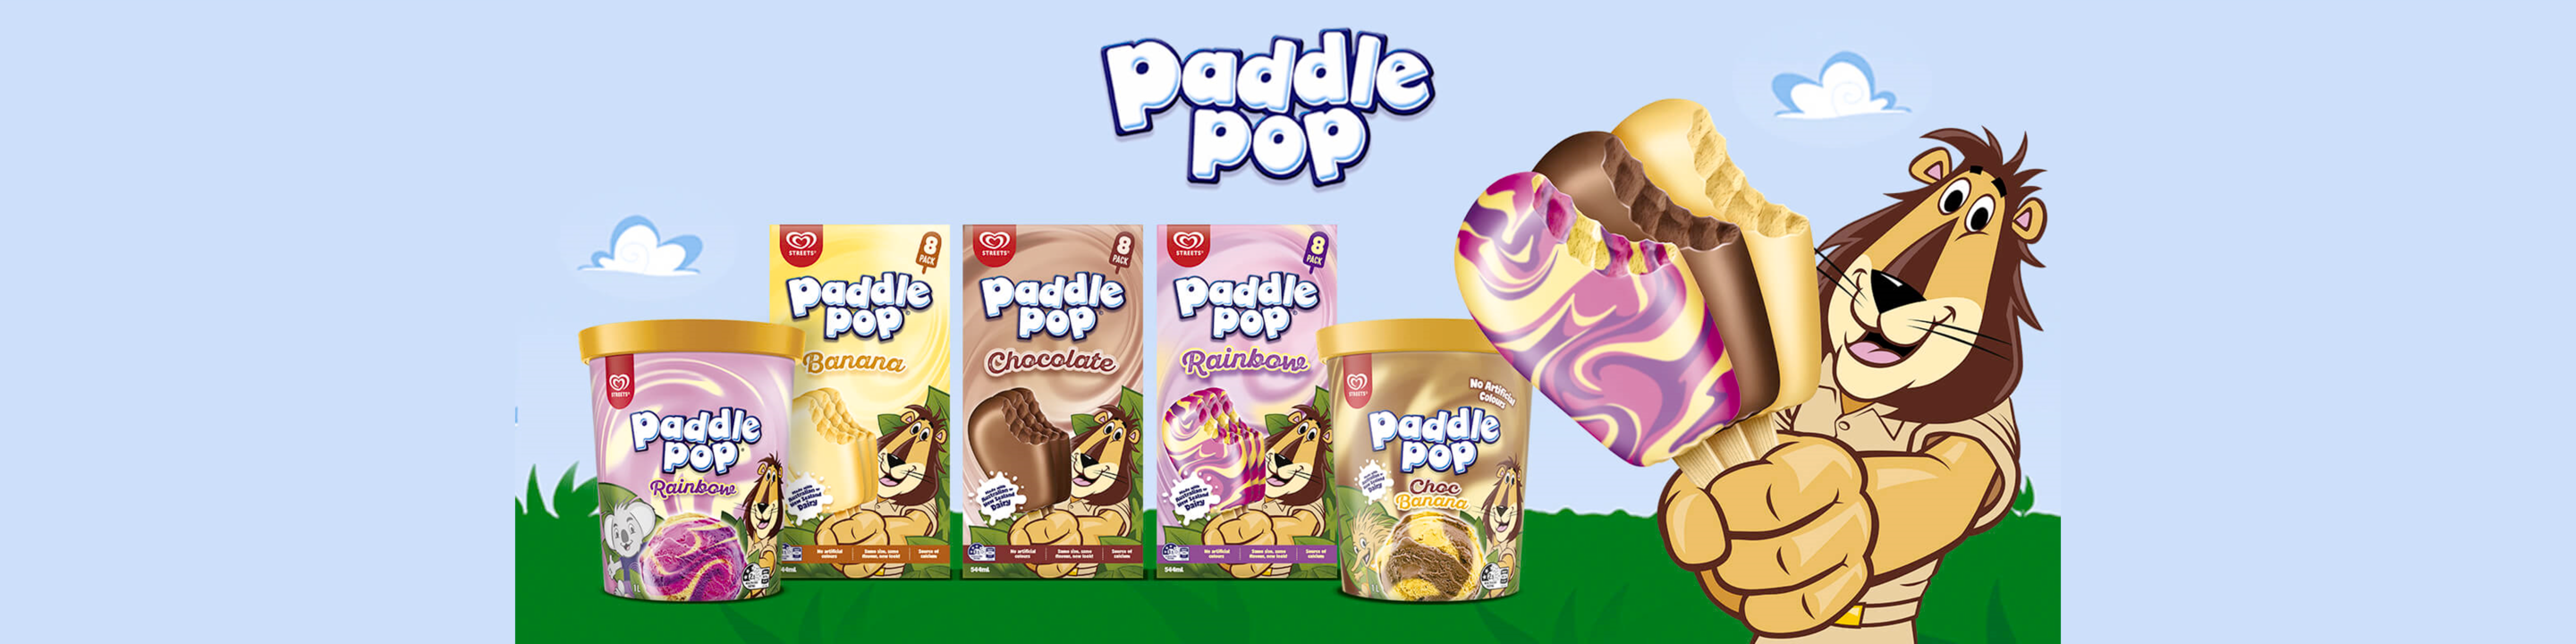 Paddle Pop Products